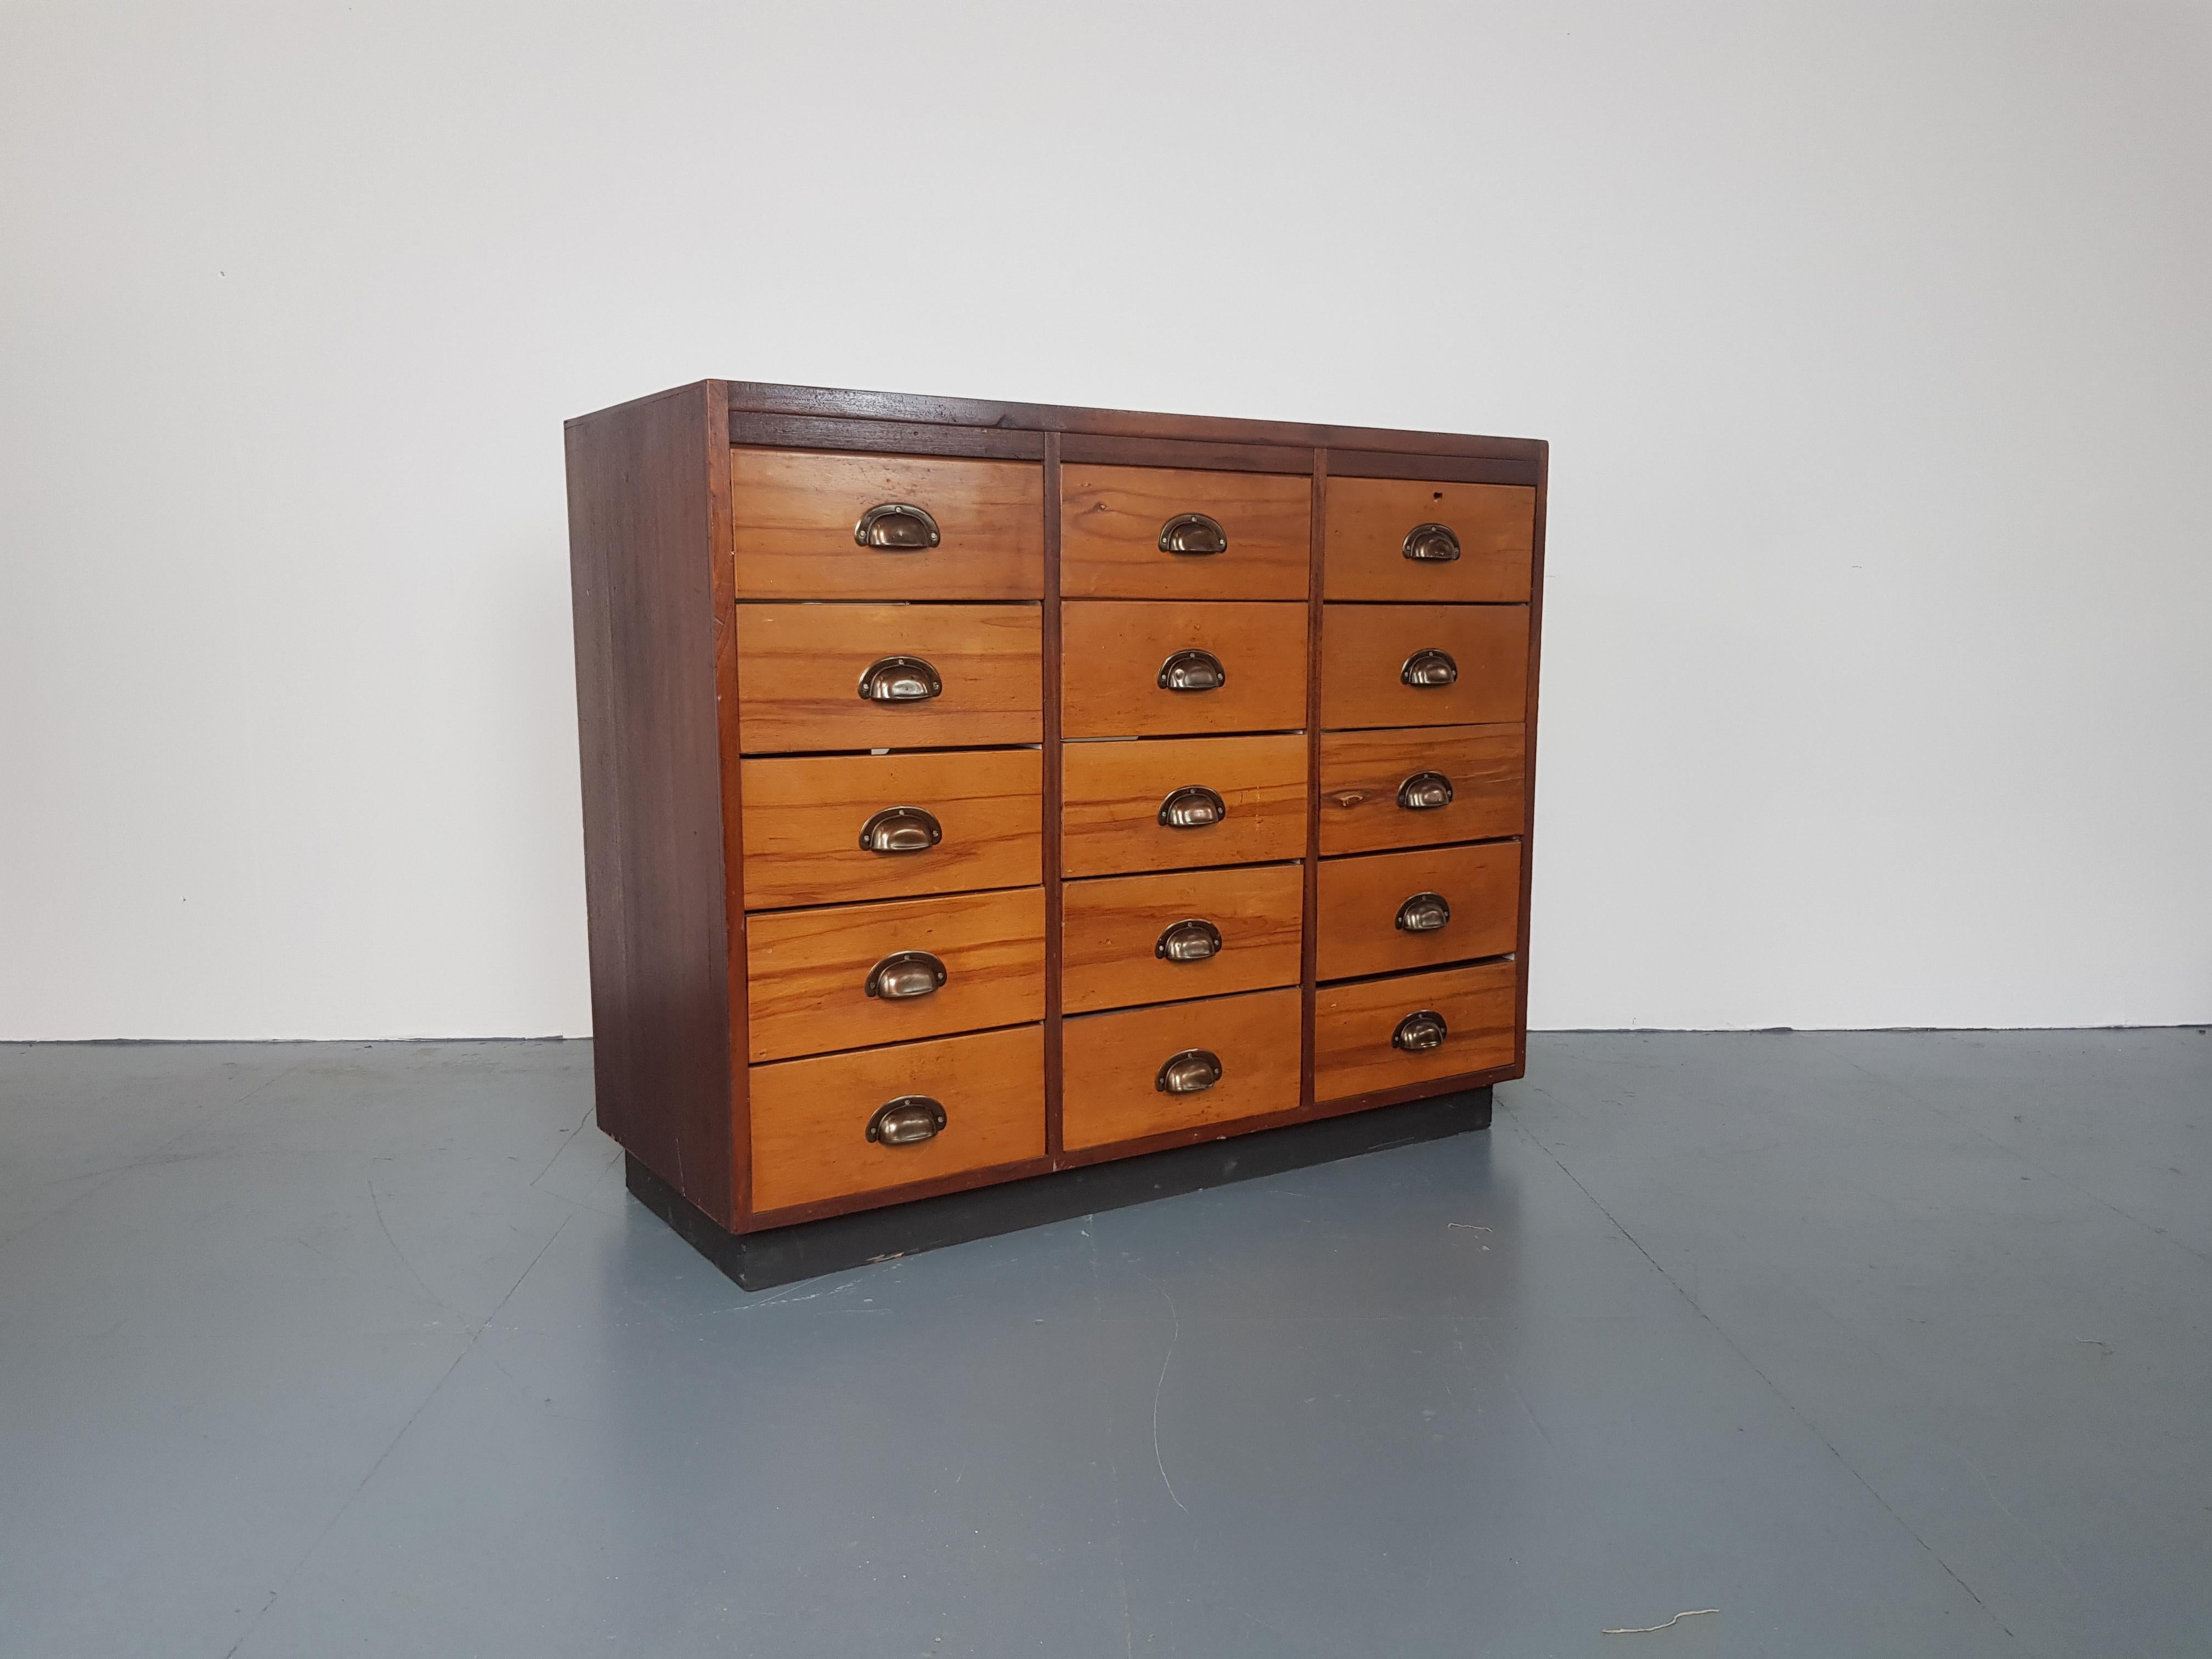 Nice vintage teak and mahogany shop counter. This is an unusual piece firstly because of the distinctive two tone wood, and also because it is handily much shallower than most shop counters of this type.

Measure: Width 113 cm

Depth 48